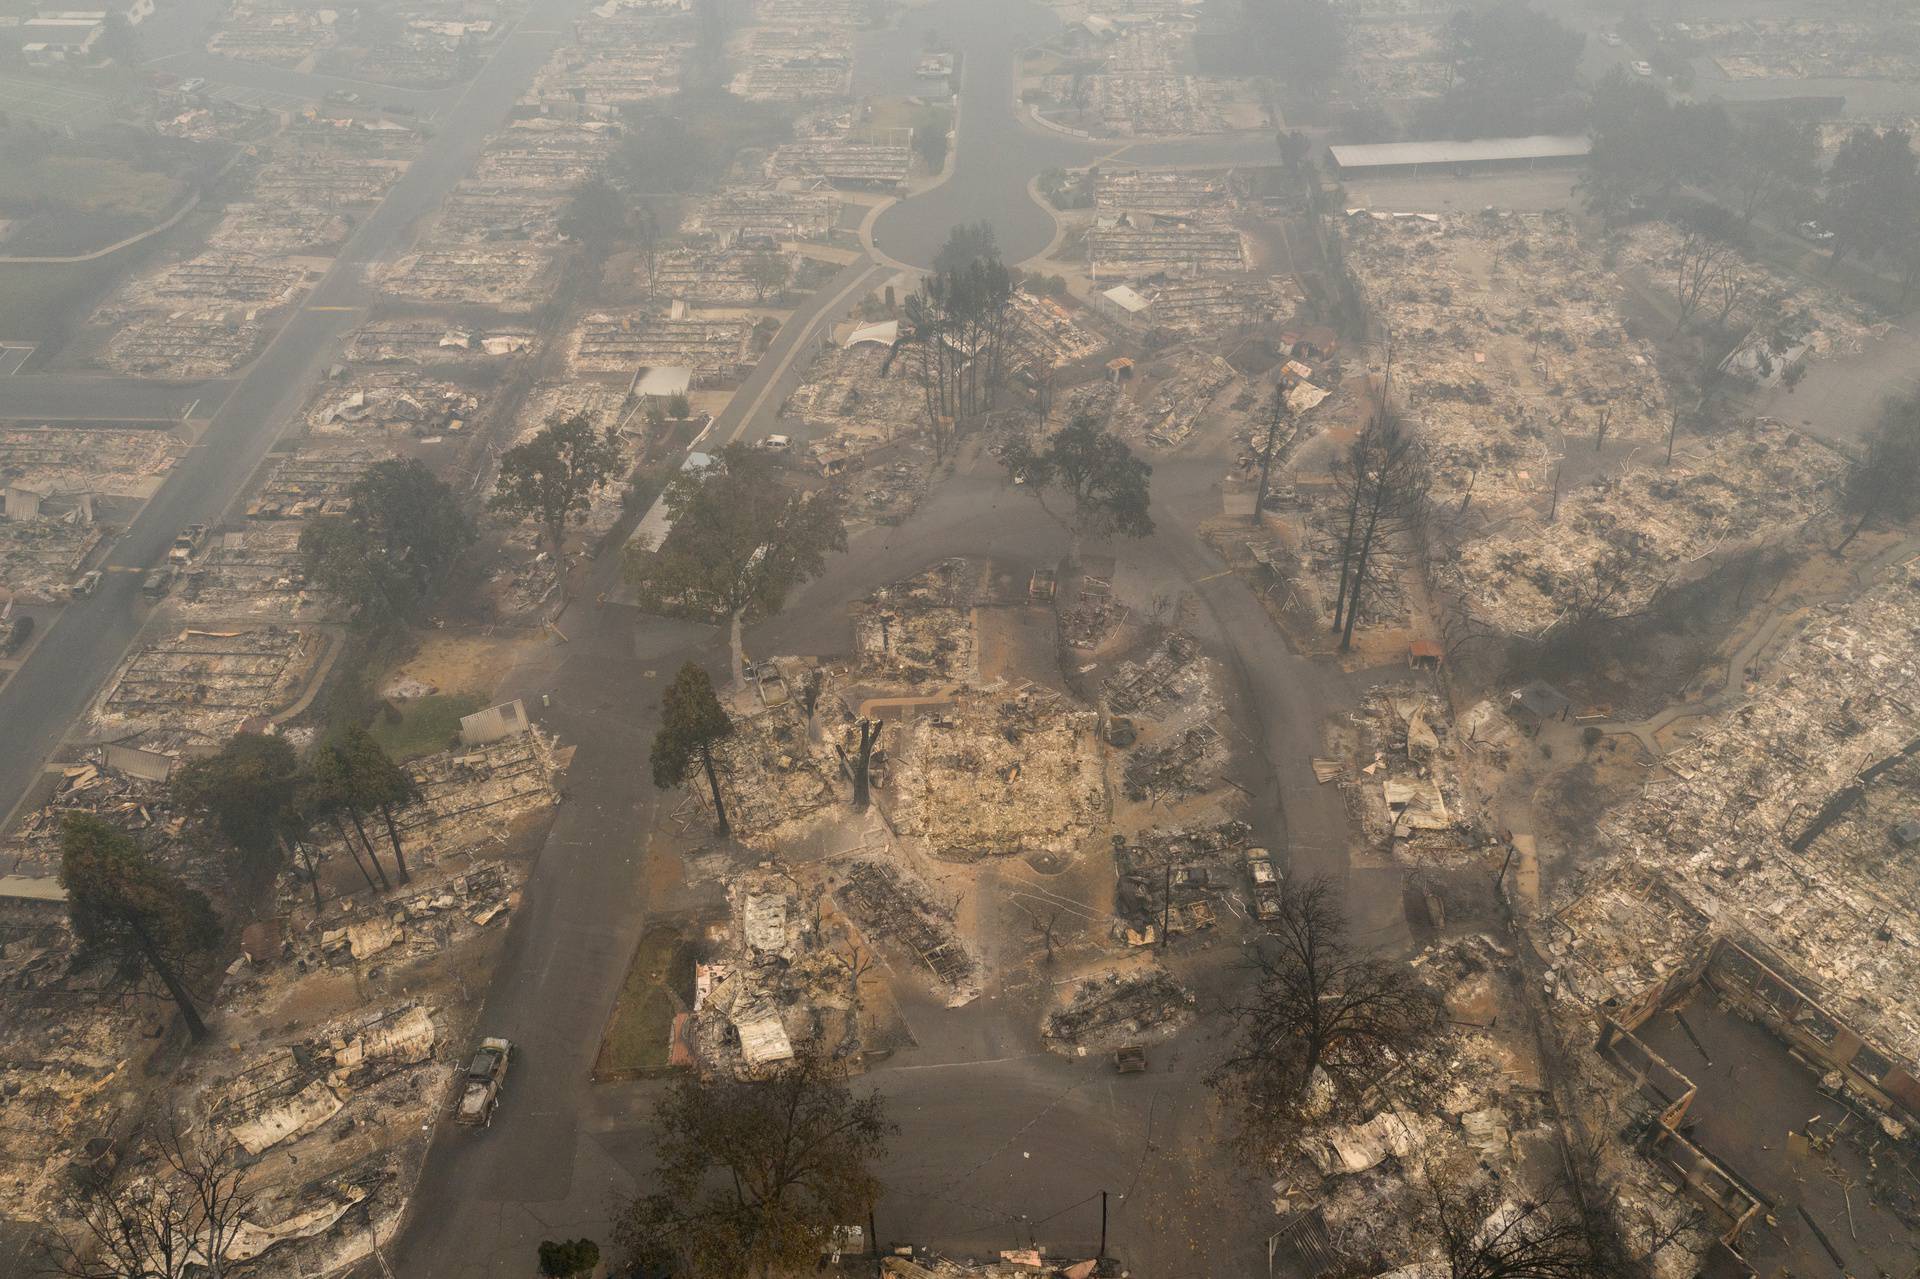 The gutted Medford Estates neighborhood in the aftermath of the Almeda fire in Medford, Oregon